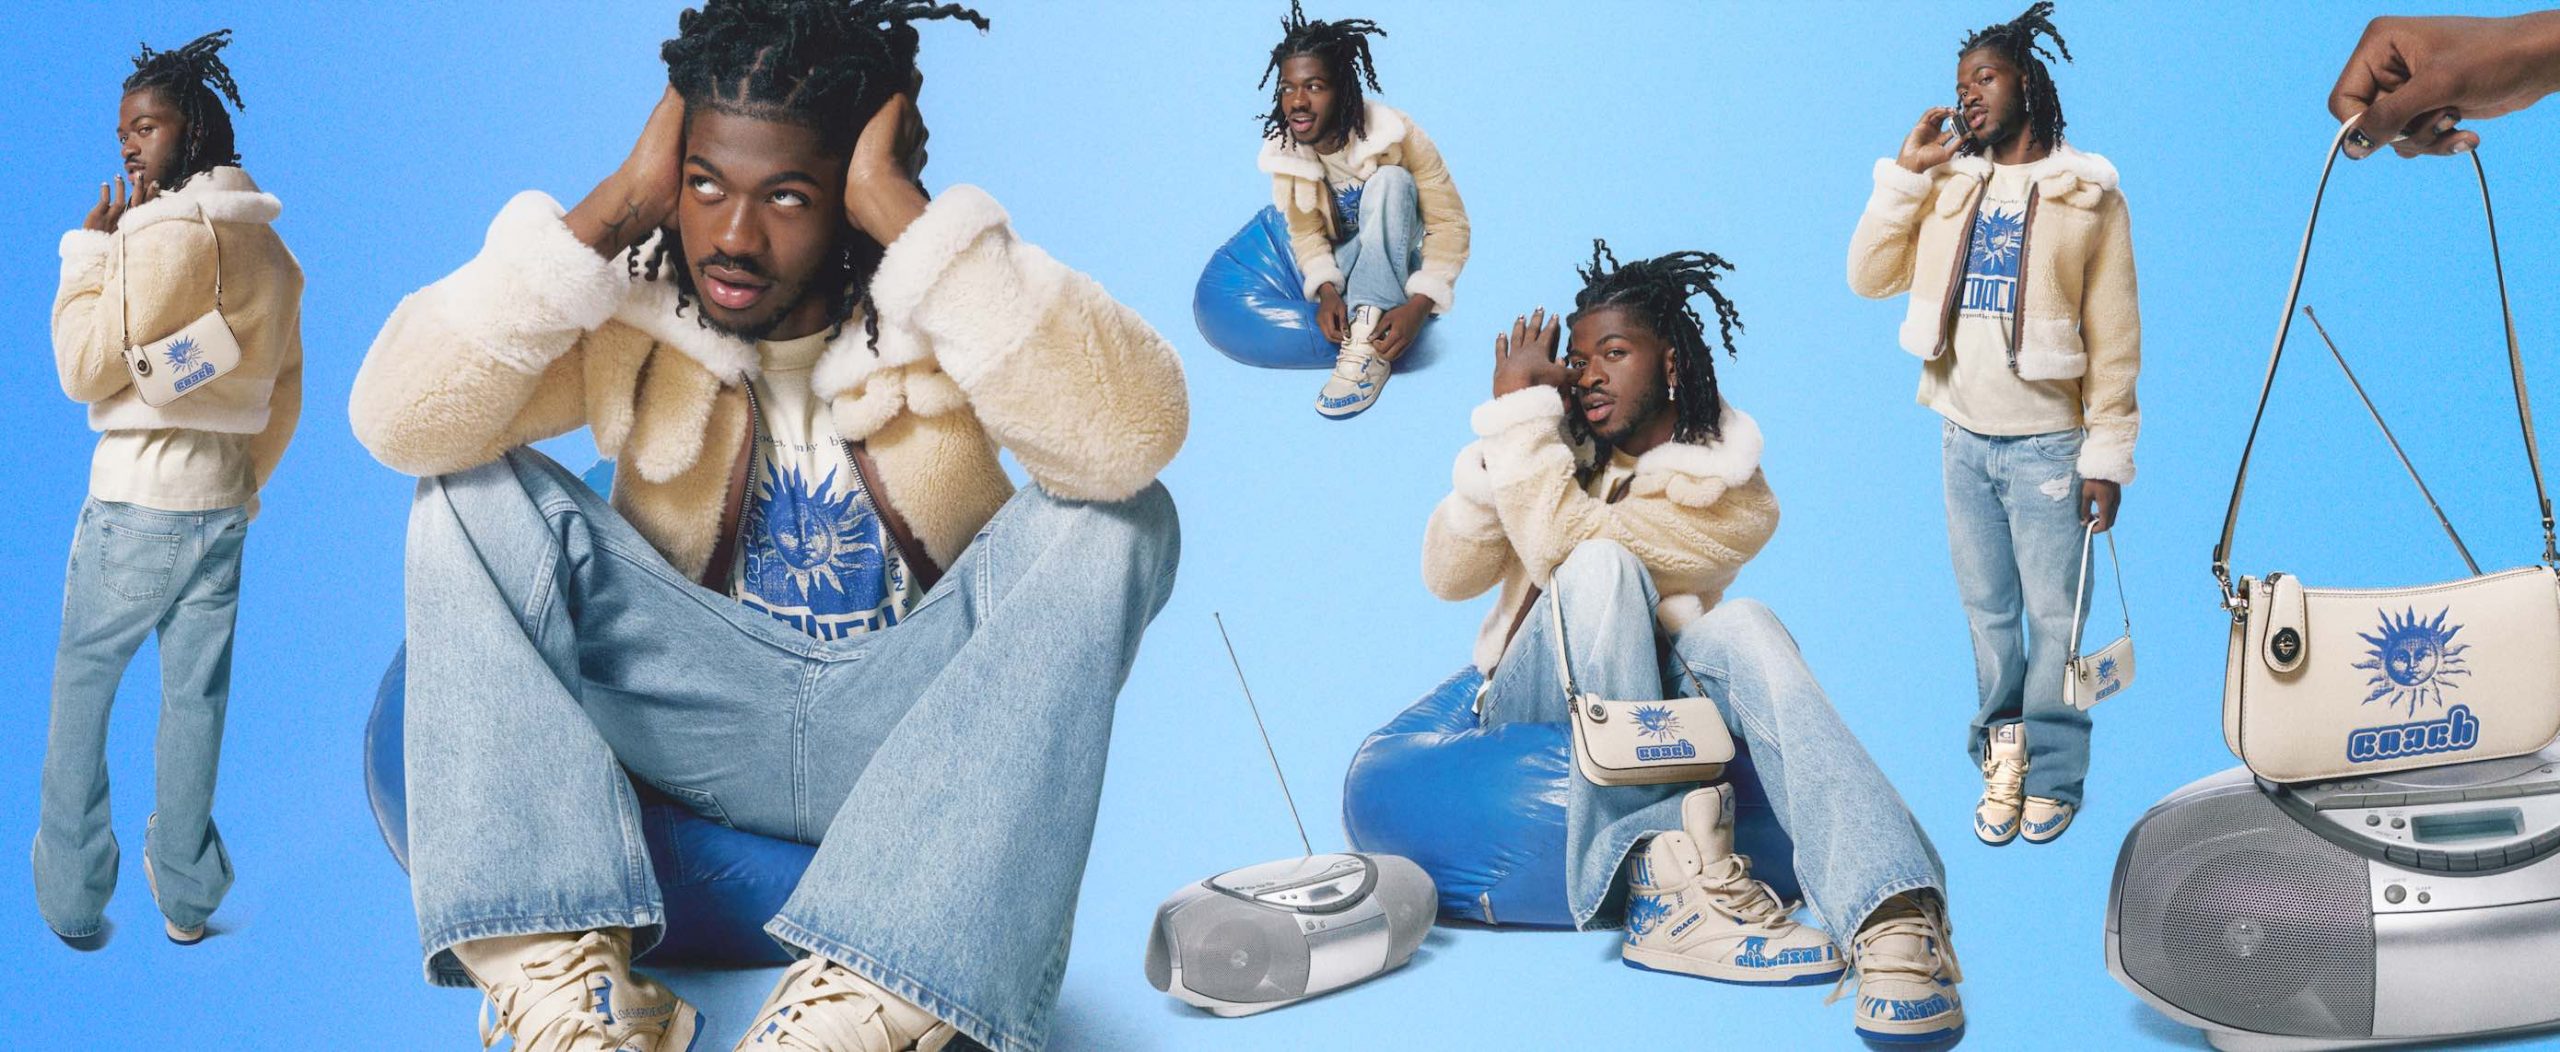 , Coach introduces capsule collection ‘The Lil Nas X Drop’